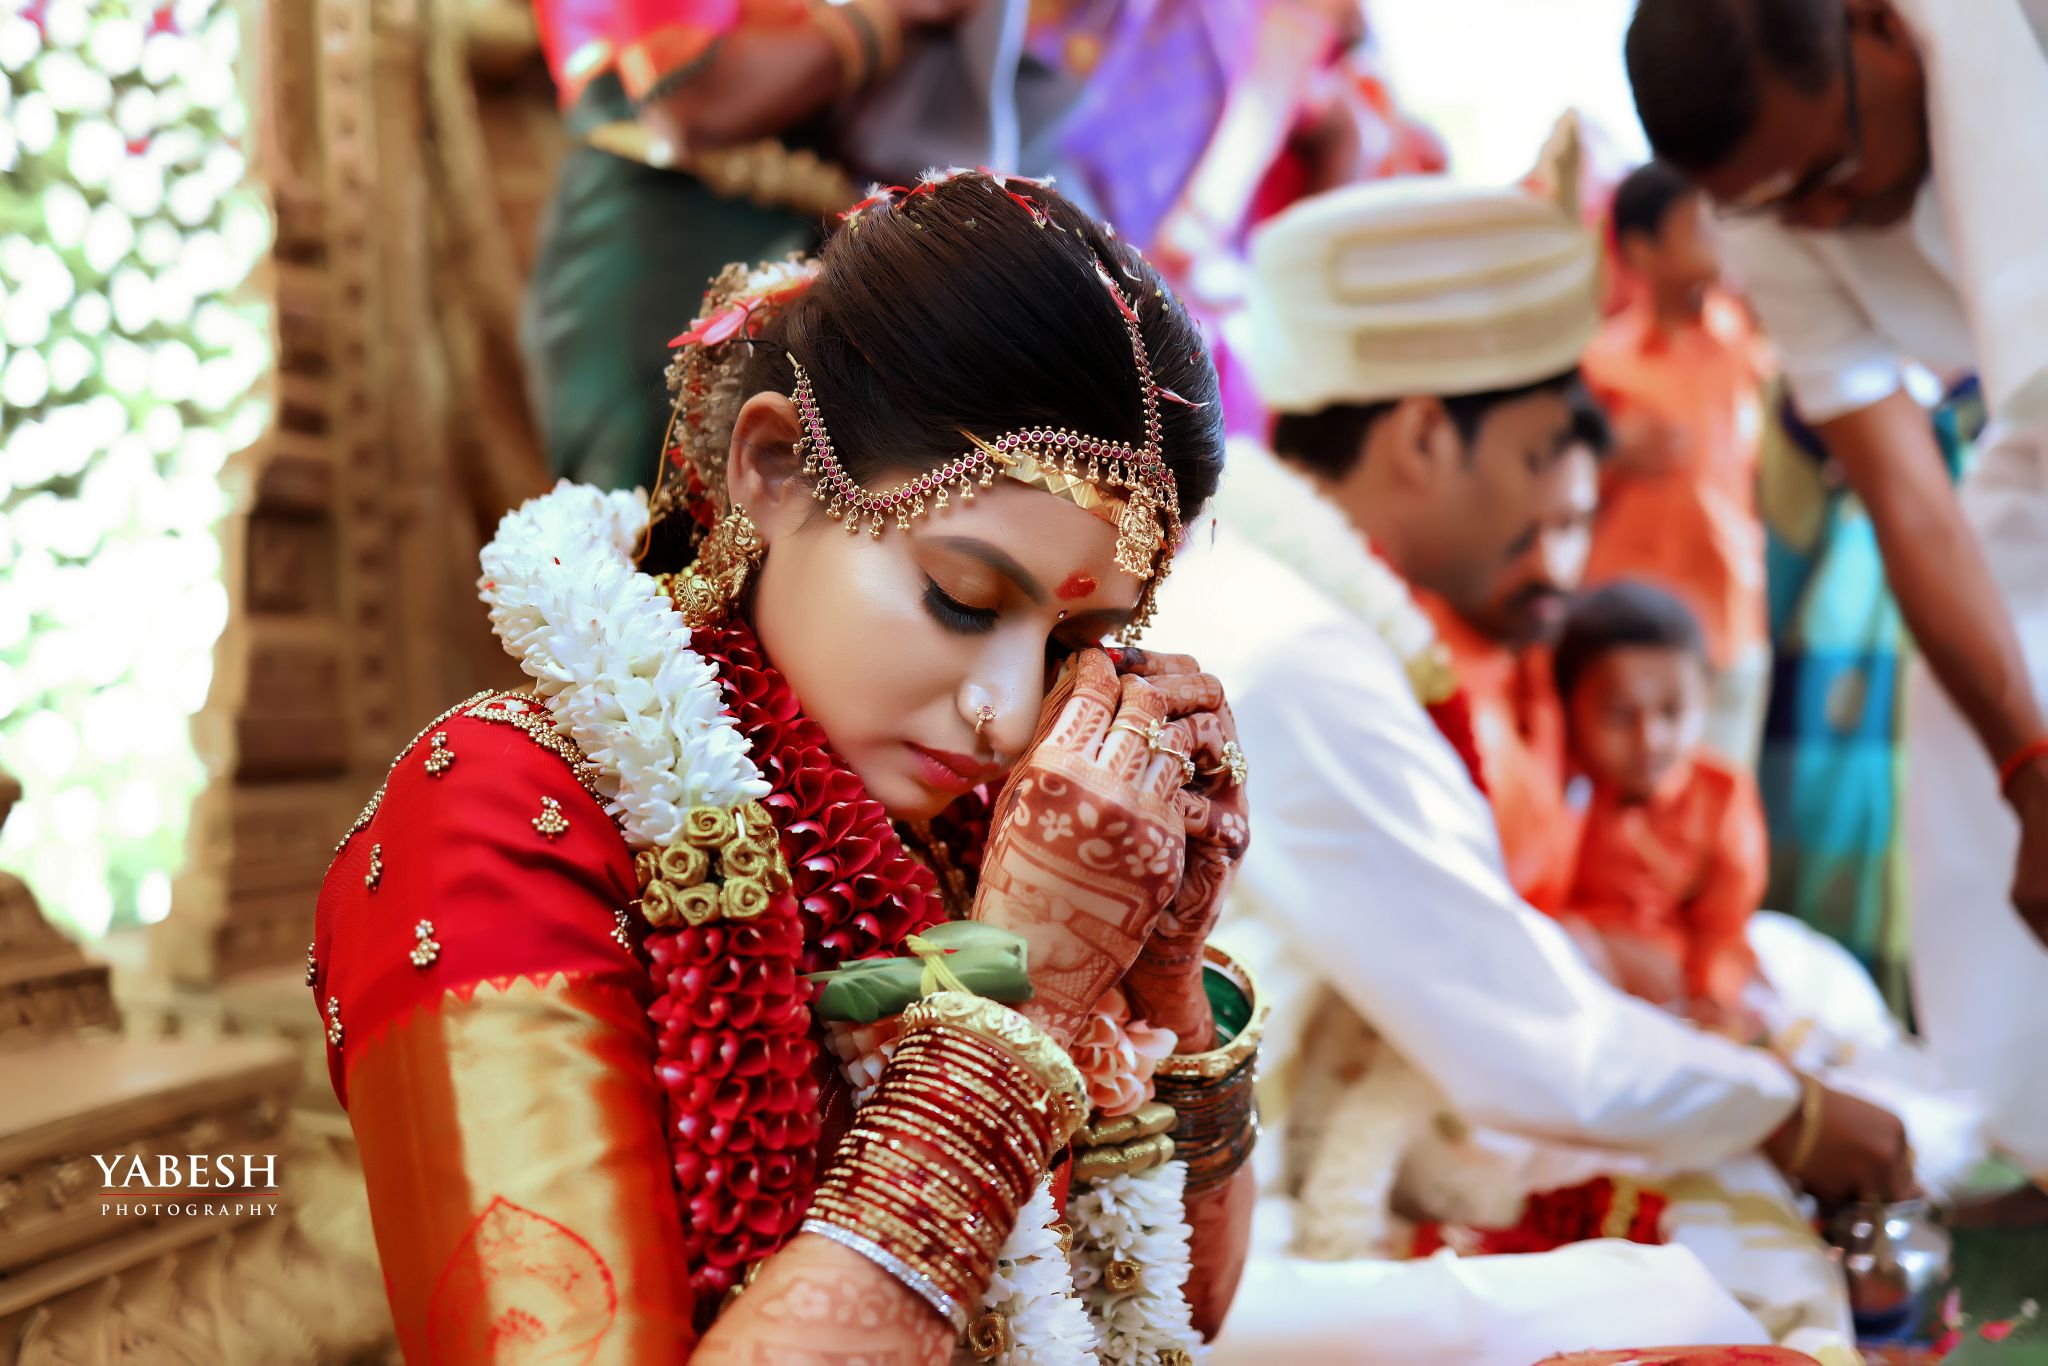 Wedding Photography Packages Affordable Wedding Photography - Your Day Captured!